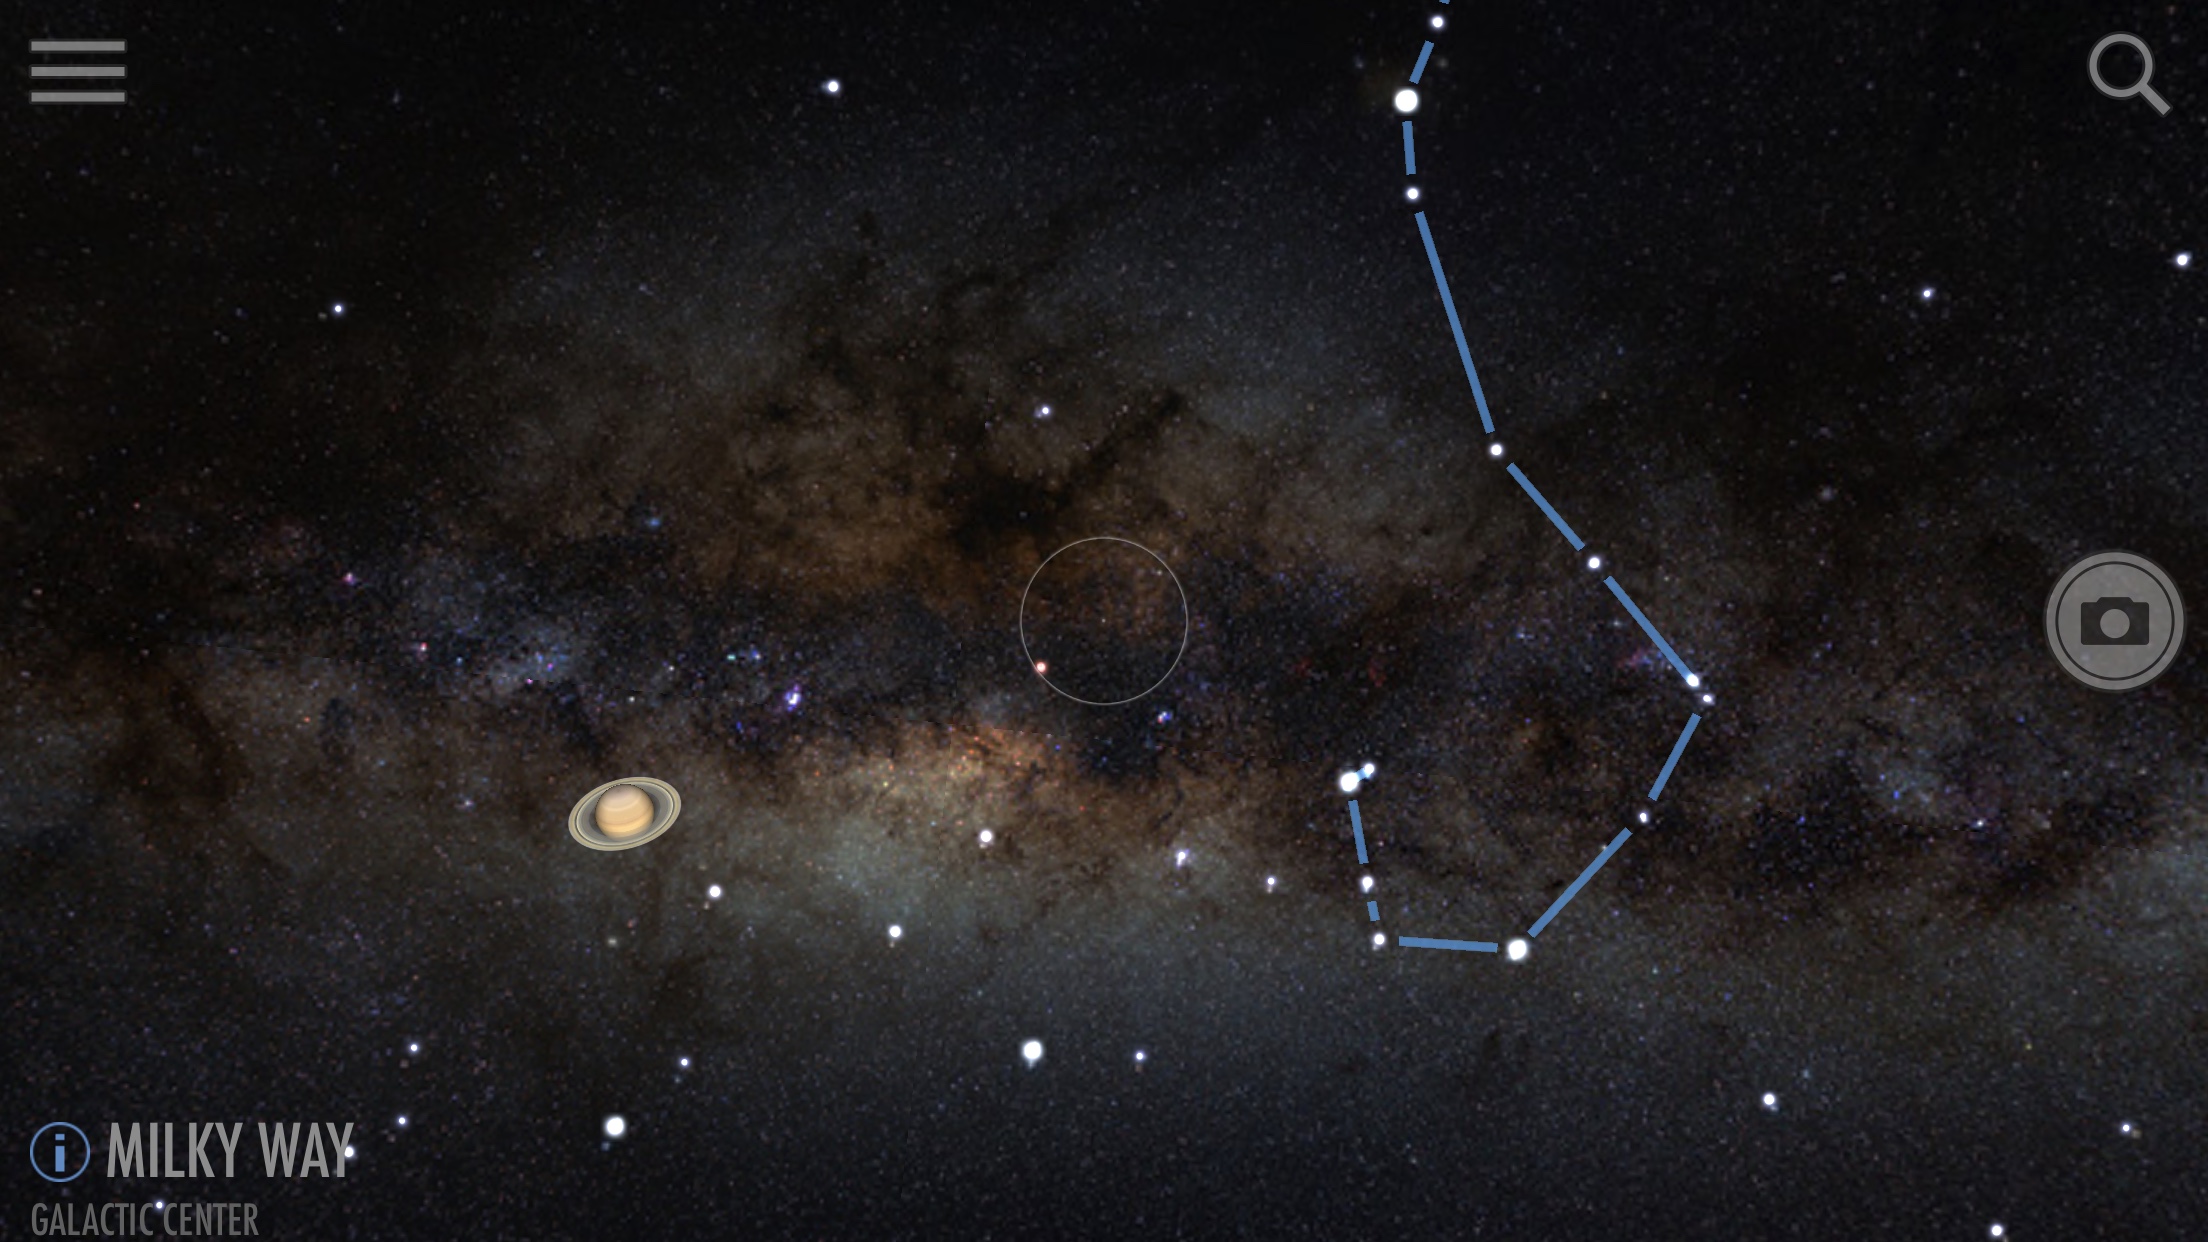 Milky Way center in SkyView iOS app screenshot. One of the best astronomy apps for iPhone.